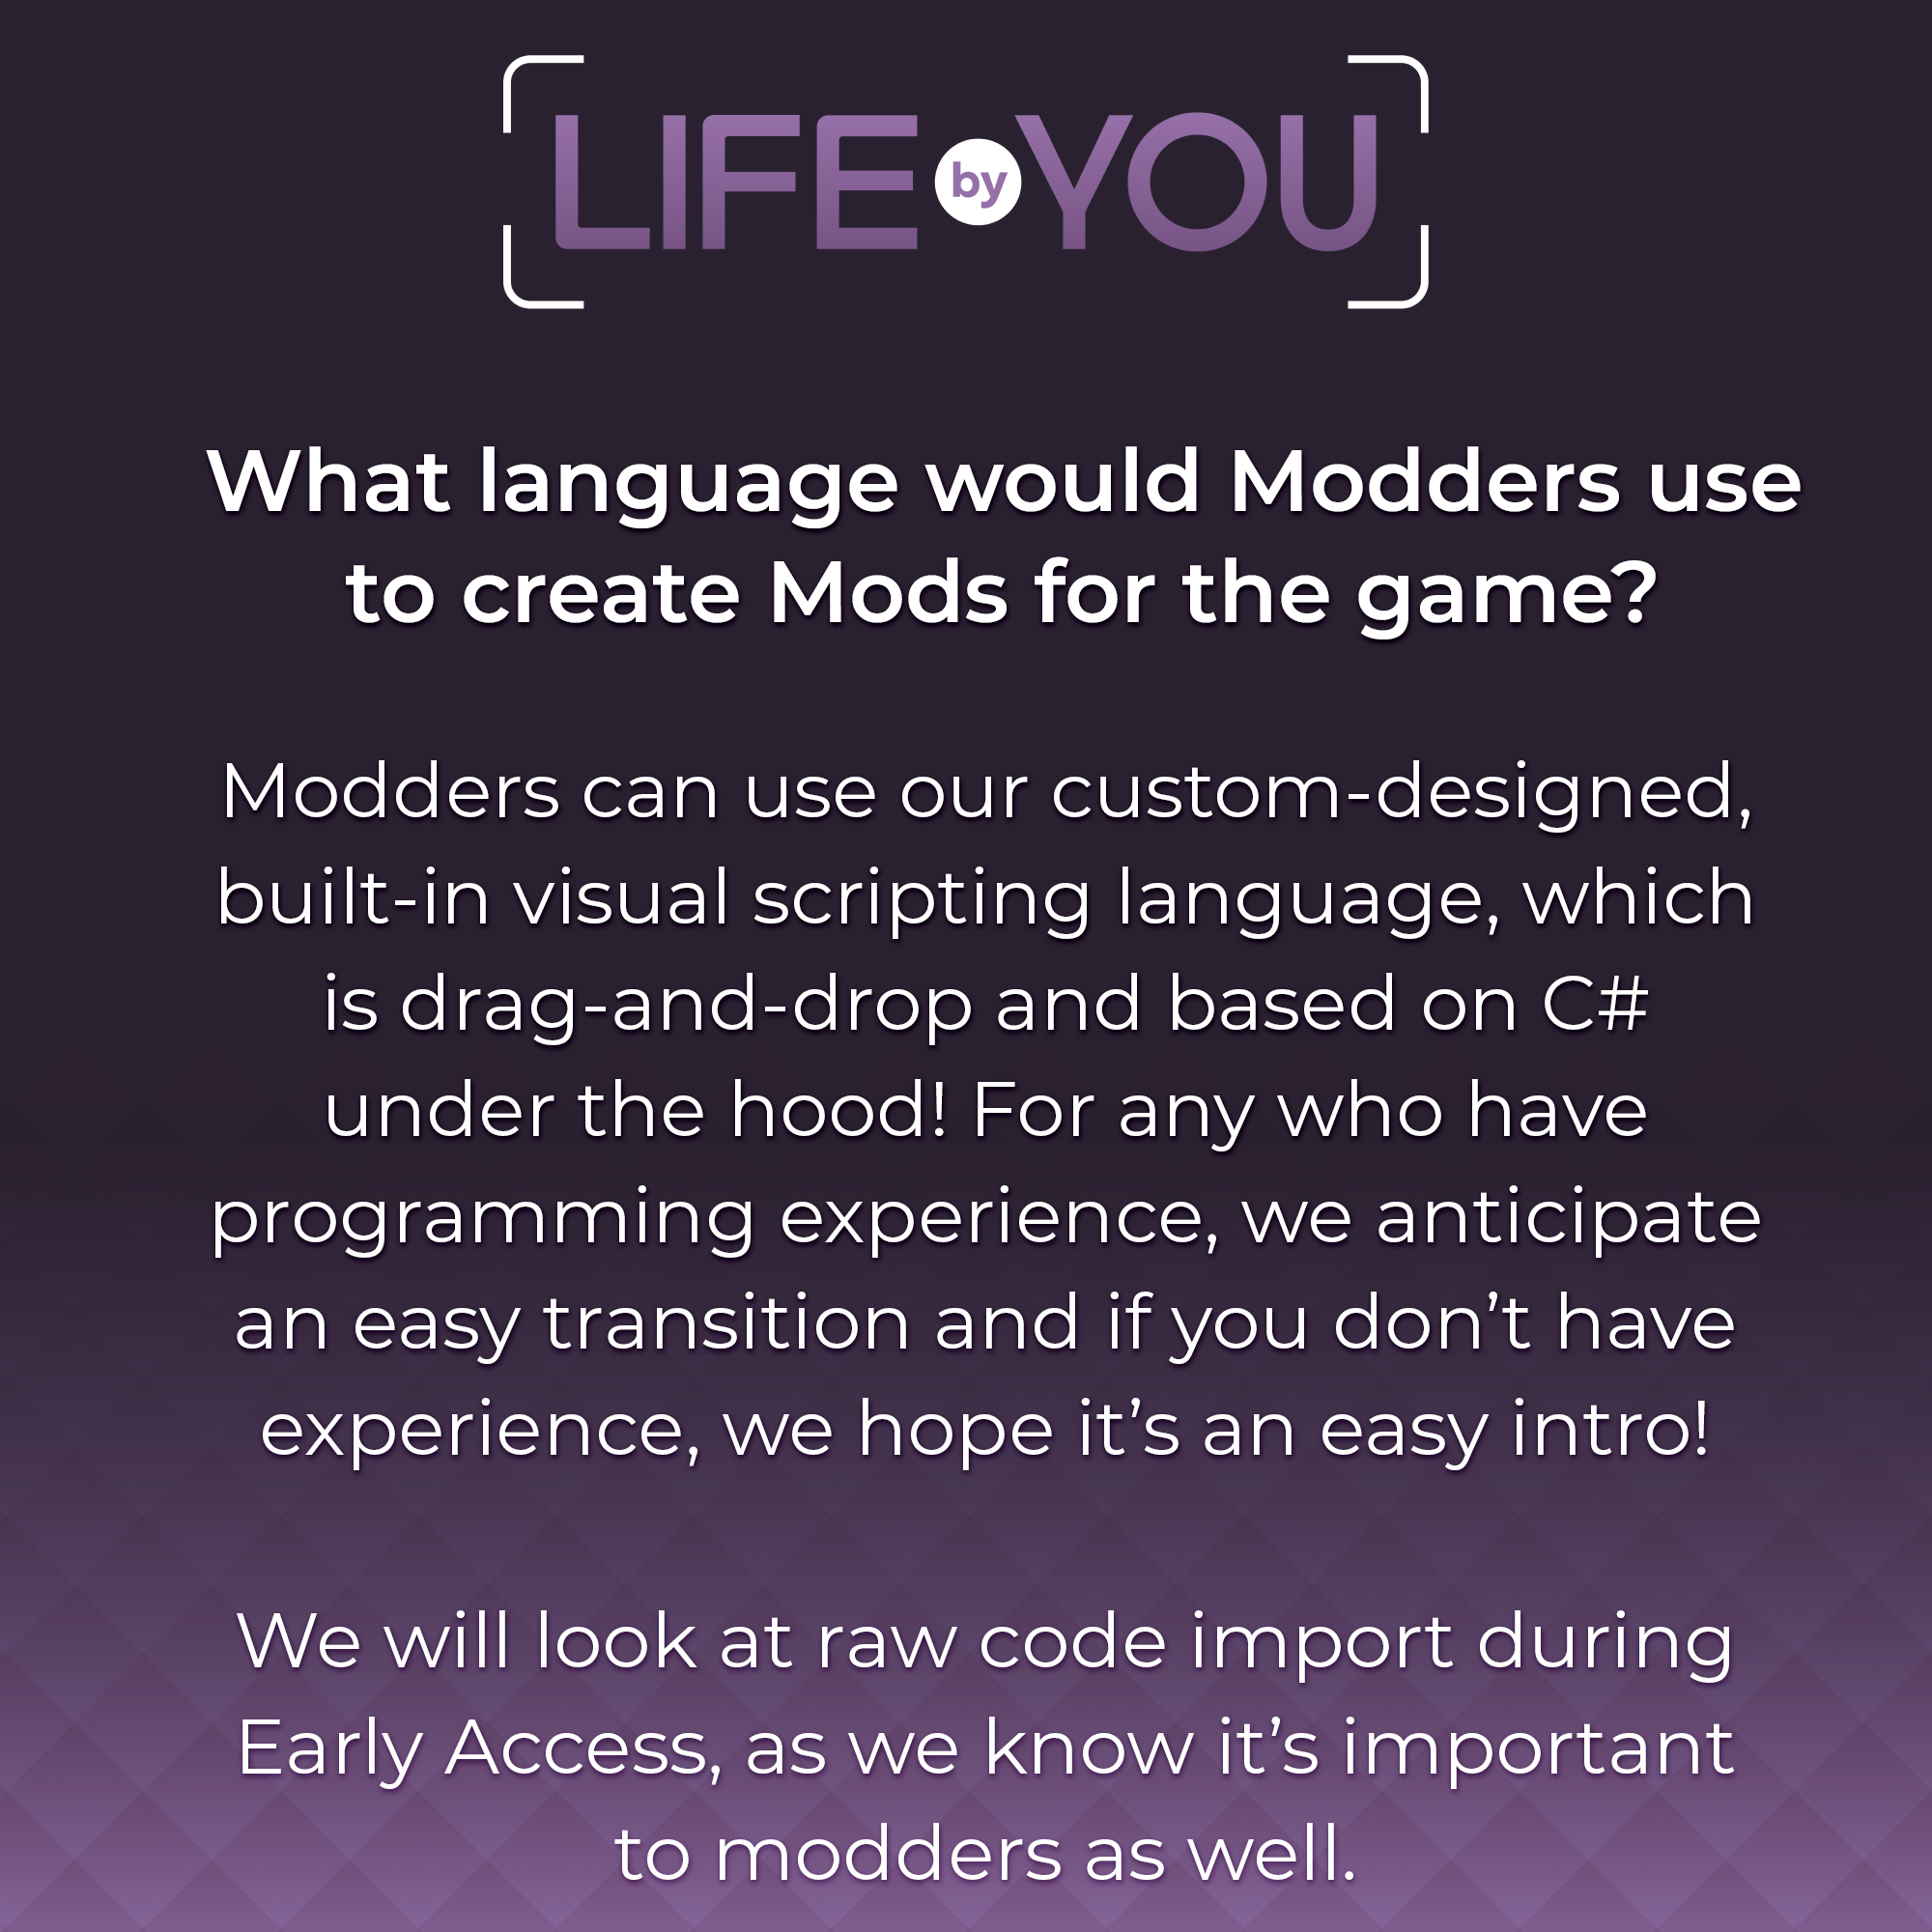 What language would Modders use?